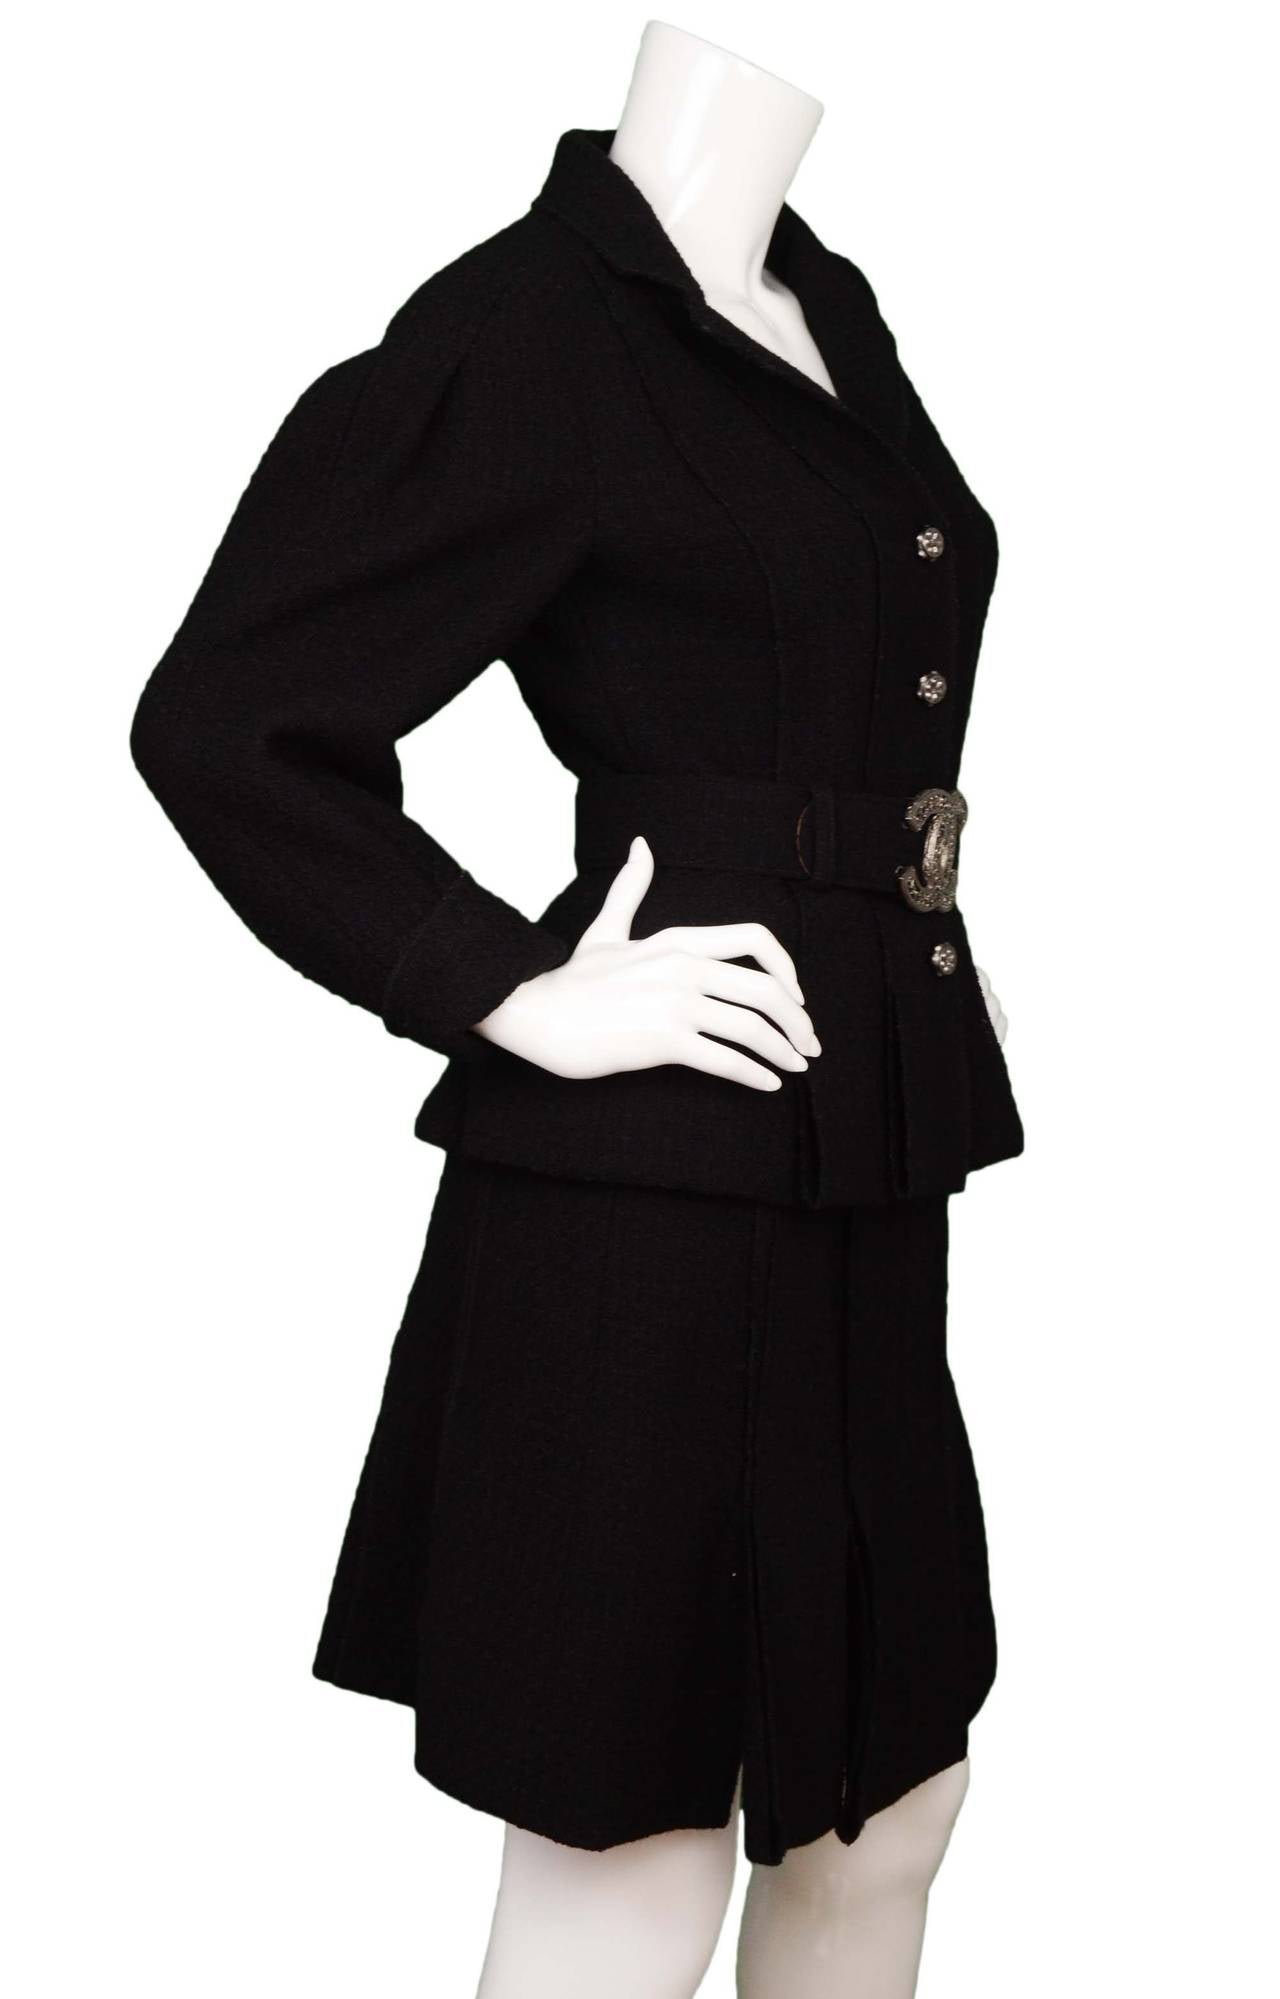 Chanel Black Boucle Wool Skirt Suit
Both skirt and jacket feature pleats throughout, belt features large silvertone CC buckle
Made in: Suit- France, Belt- Italy
Year of Production: 2008
Color: Black and silvertone
Composition: Suit- 100% wool,